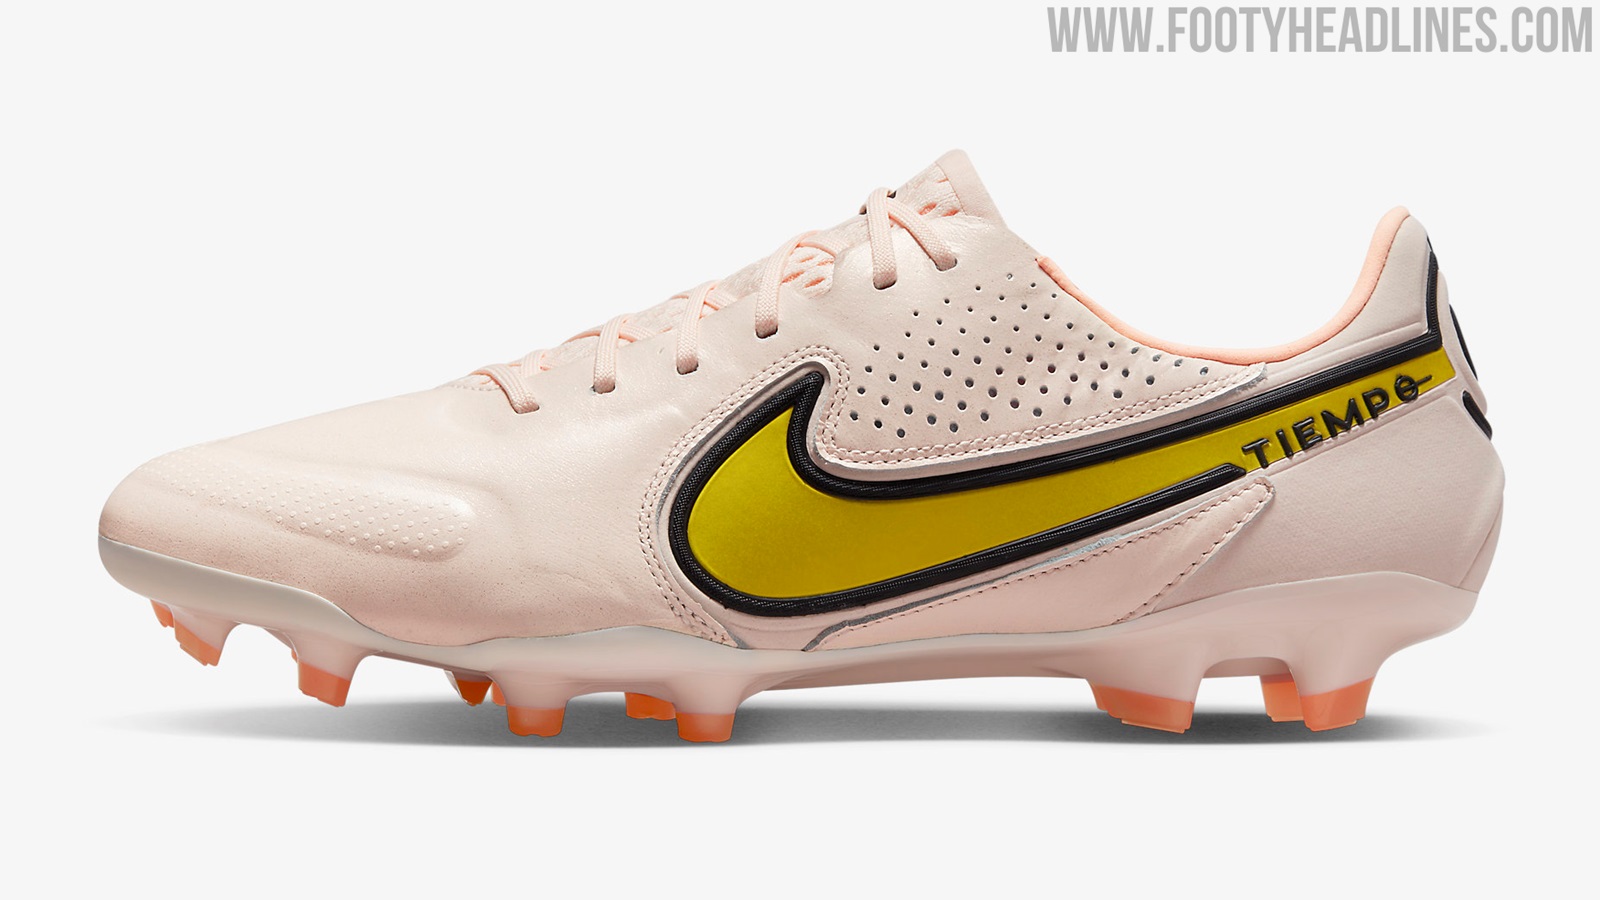 Nike Tiempo Legend 9 'Lucent Pack' 2022-23 Boots - Footy Headlines